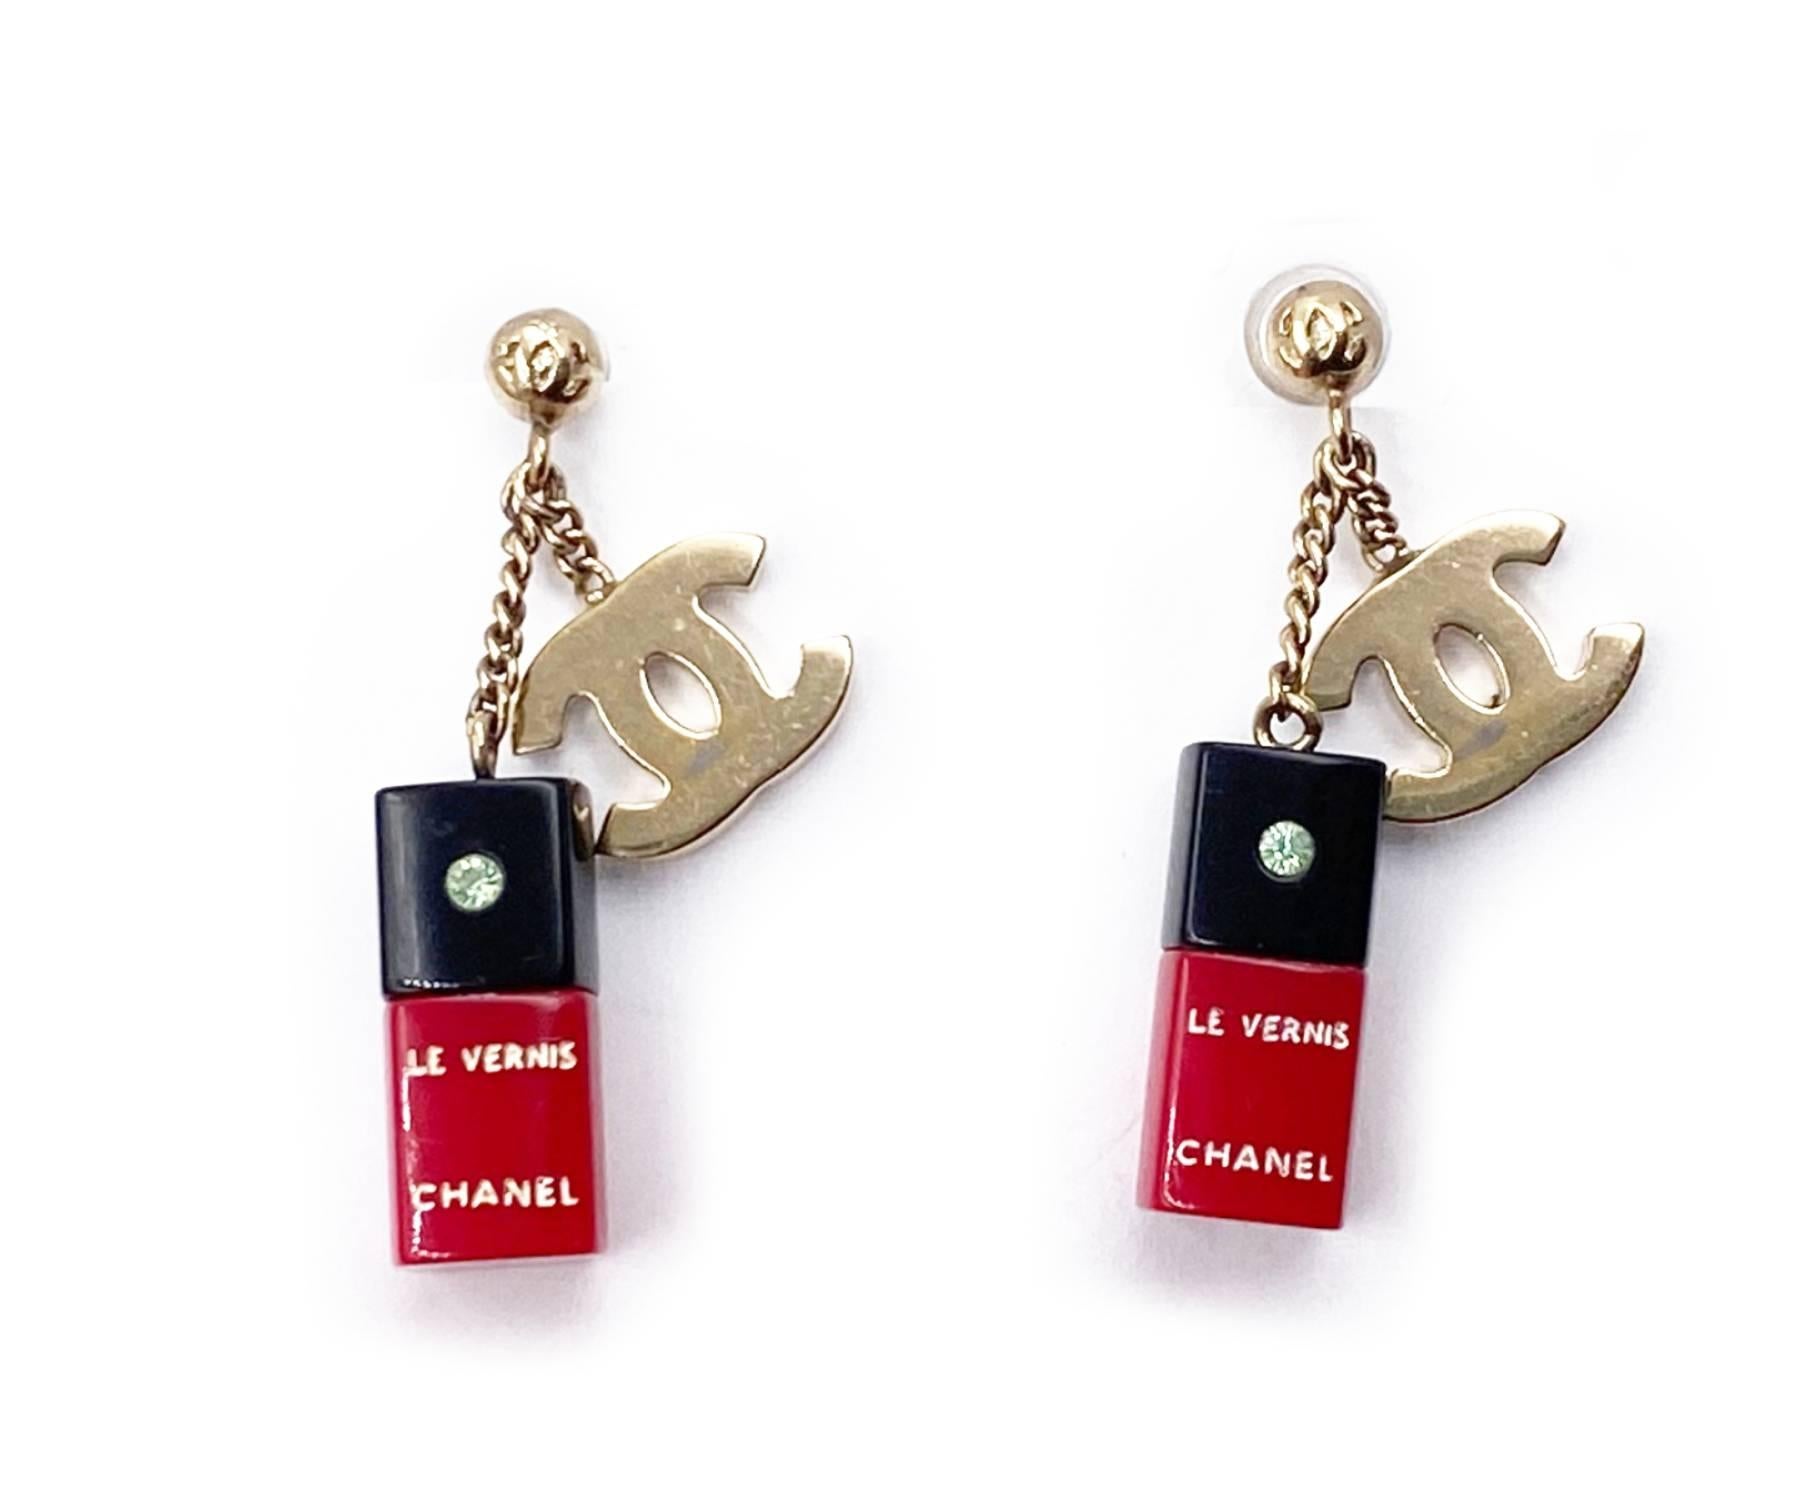 Chanel Vintage Rare Gold CC Red Nail Polish Piercing Earrings

*Marked 04
*Made in Italy
*Comes with original box

-Approximately 1.5″ x 0.5″
-Very pretty and rare
-The CCs show some light color off.

2034-45201